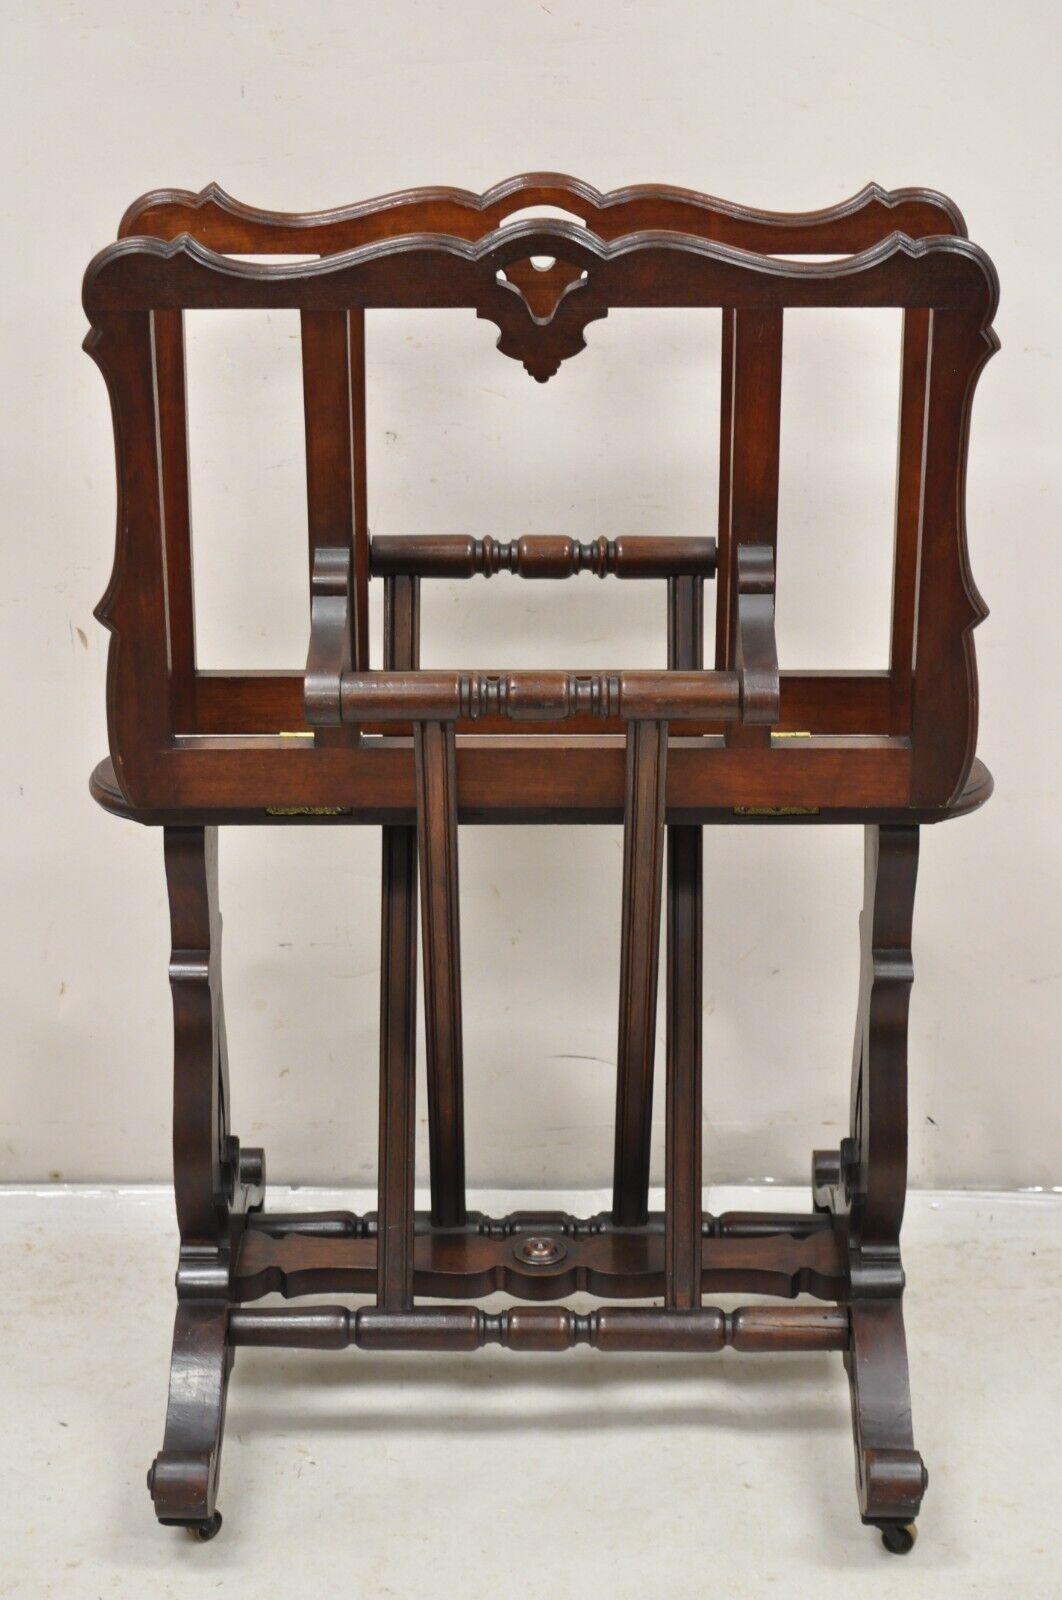 Antique American Victorian Carved Black Walnut Adjustable Folio Print Stand. Item features 3 adjustable positions, solid carved walnut, quality American craftsmanship, very nice antique stand. Circa 1880. Measurements: 38.5